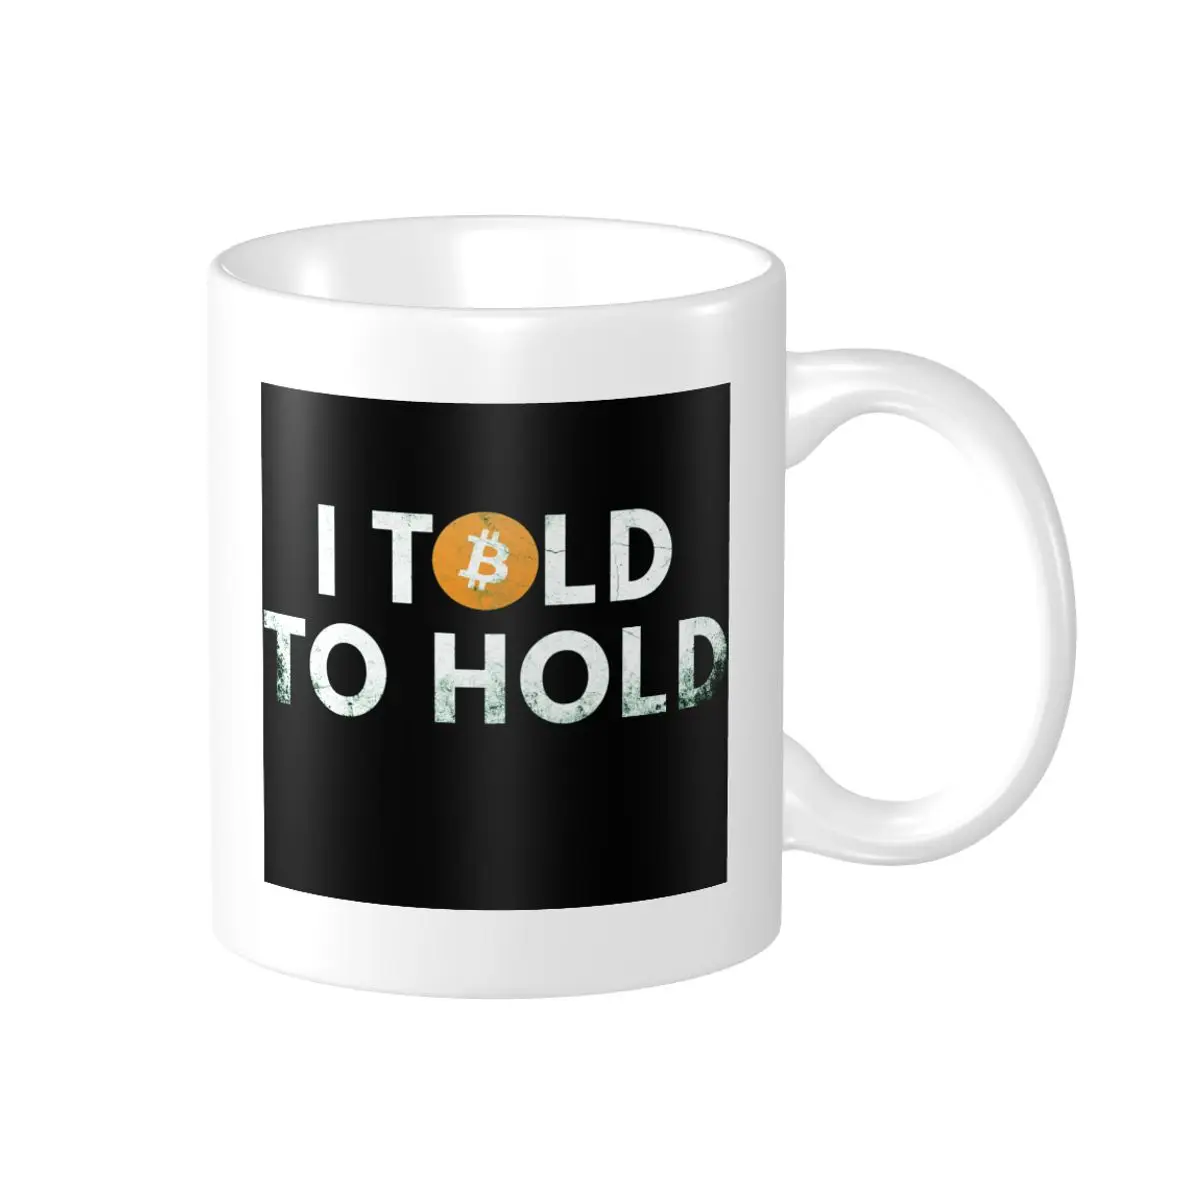 

Promo I Told To Hold Bitcoin Gifth Mugs Graphic Cool Cups CUPS Print Funny Novelty Blockchain coffee cups